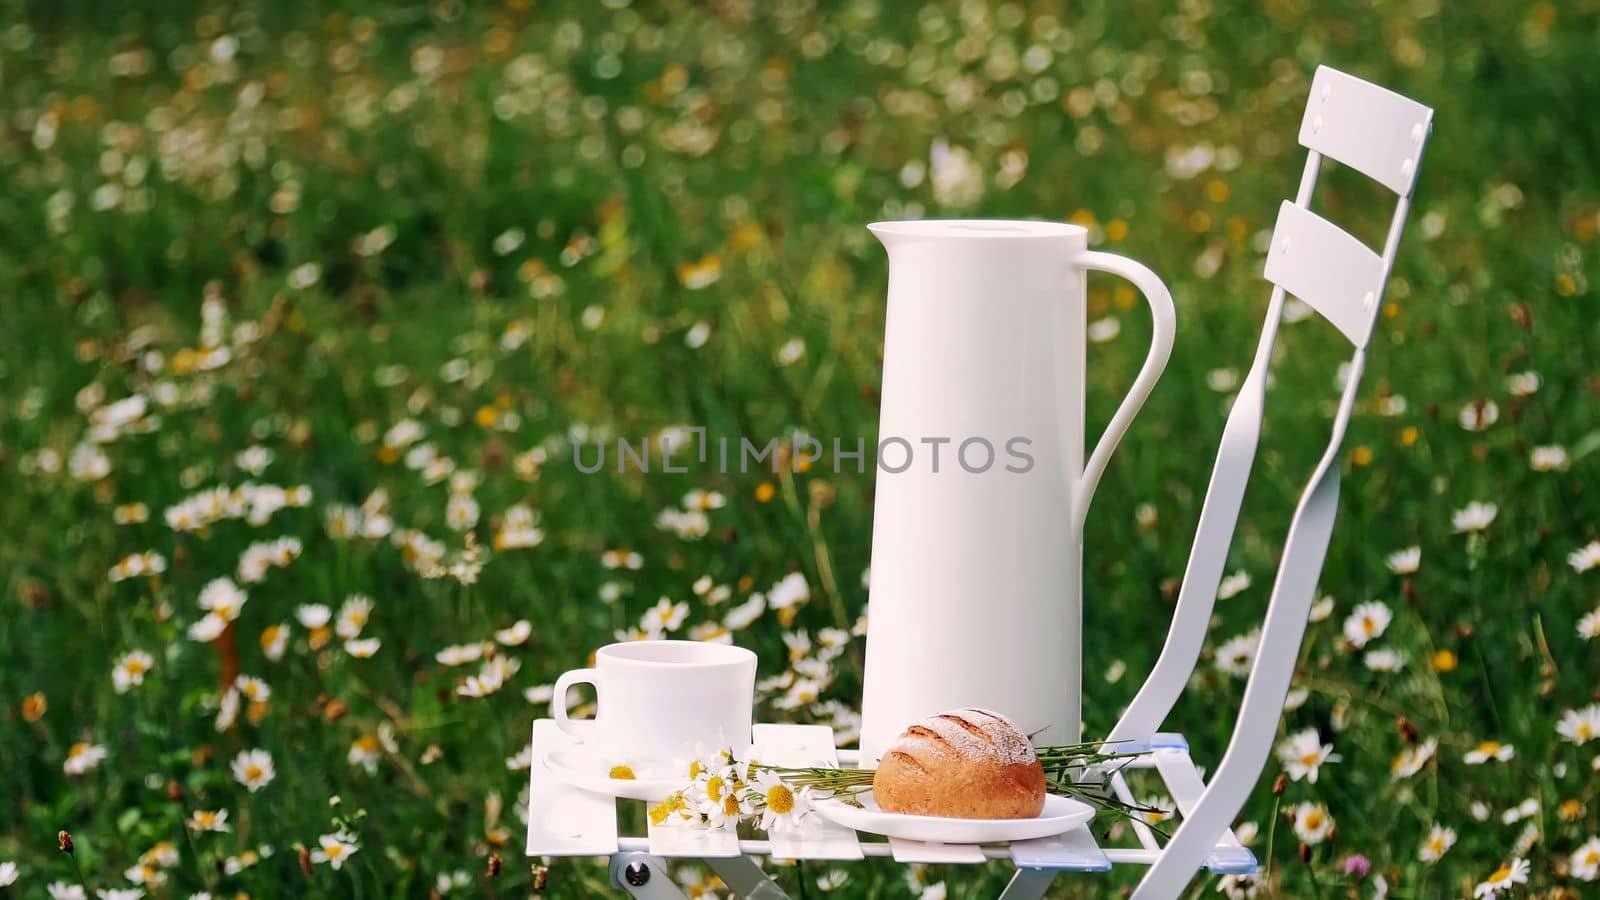 Among the chamomile lawn stands a white chair. On it there is a composition of a white jug, a white cup with tea, a bread and a bouquet of chamomiles. High quality photo